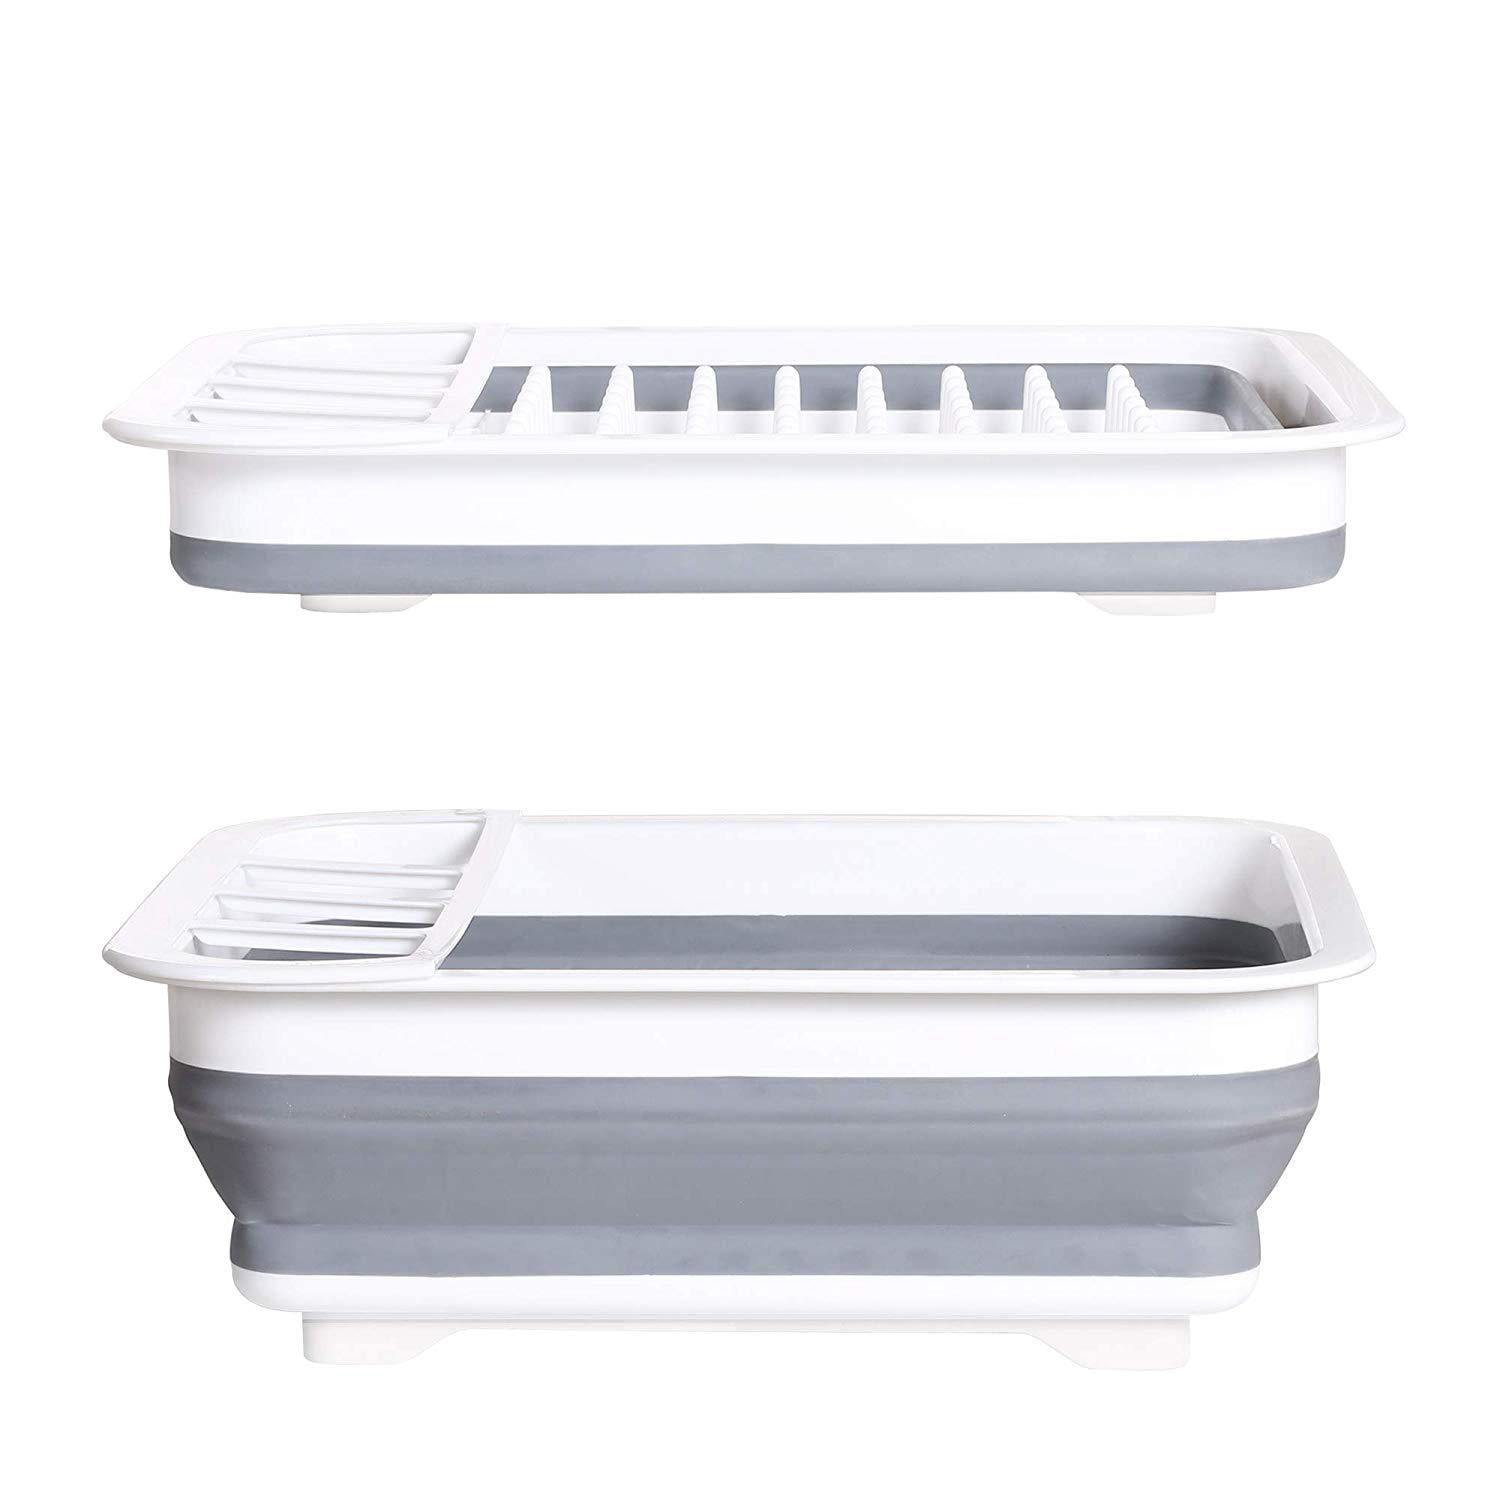 Think Flat Collapsible Compact Dish Rack – Abalynn